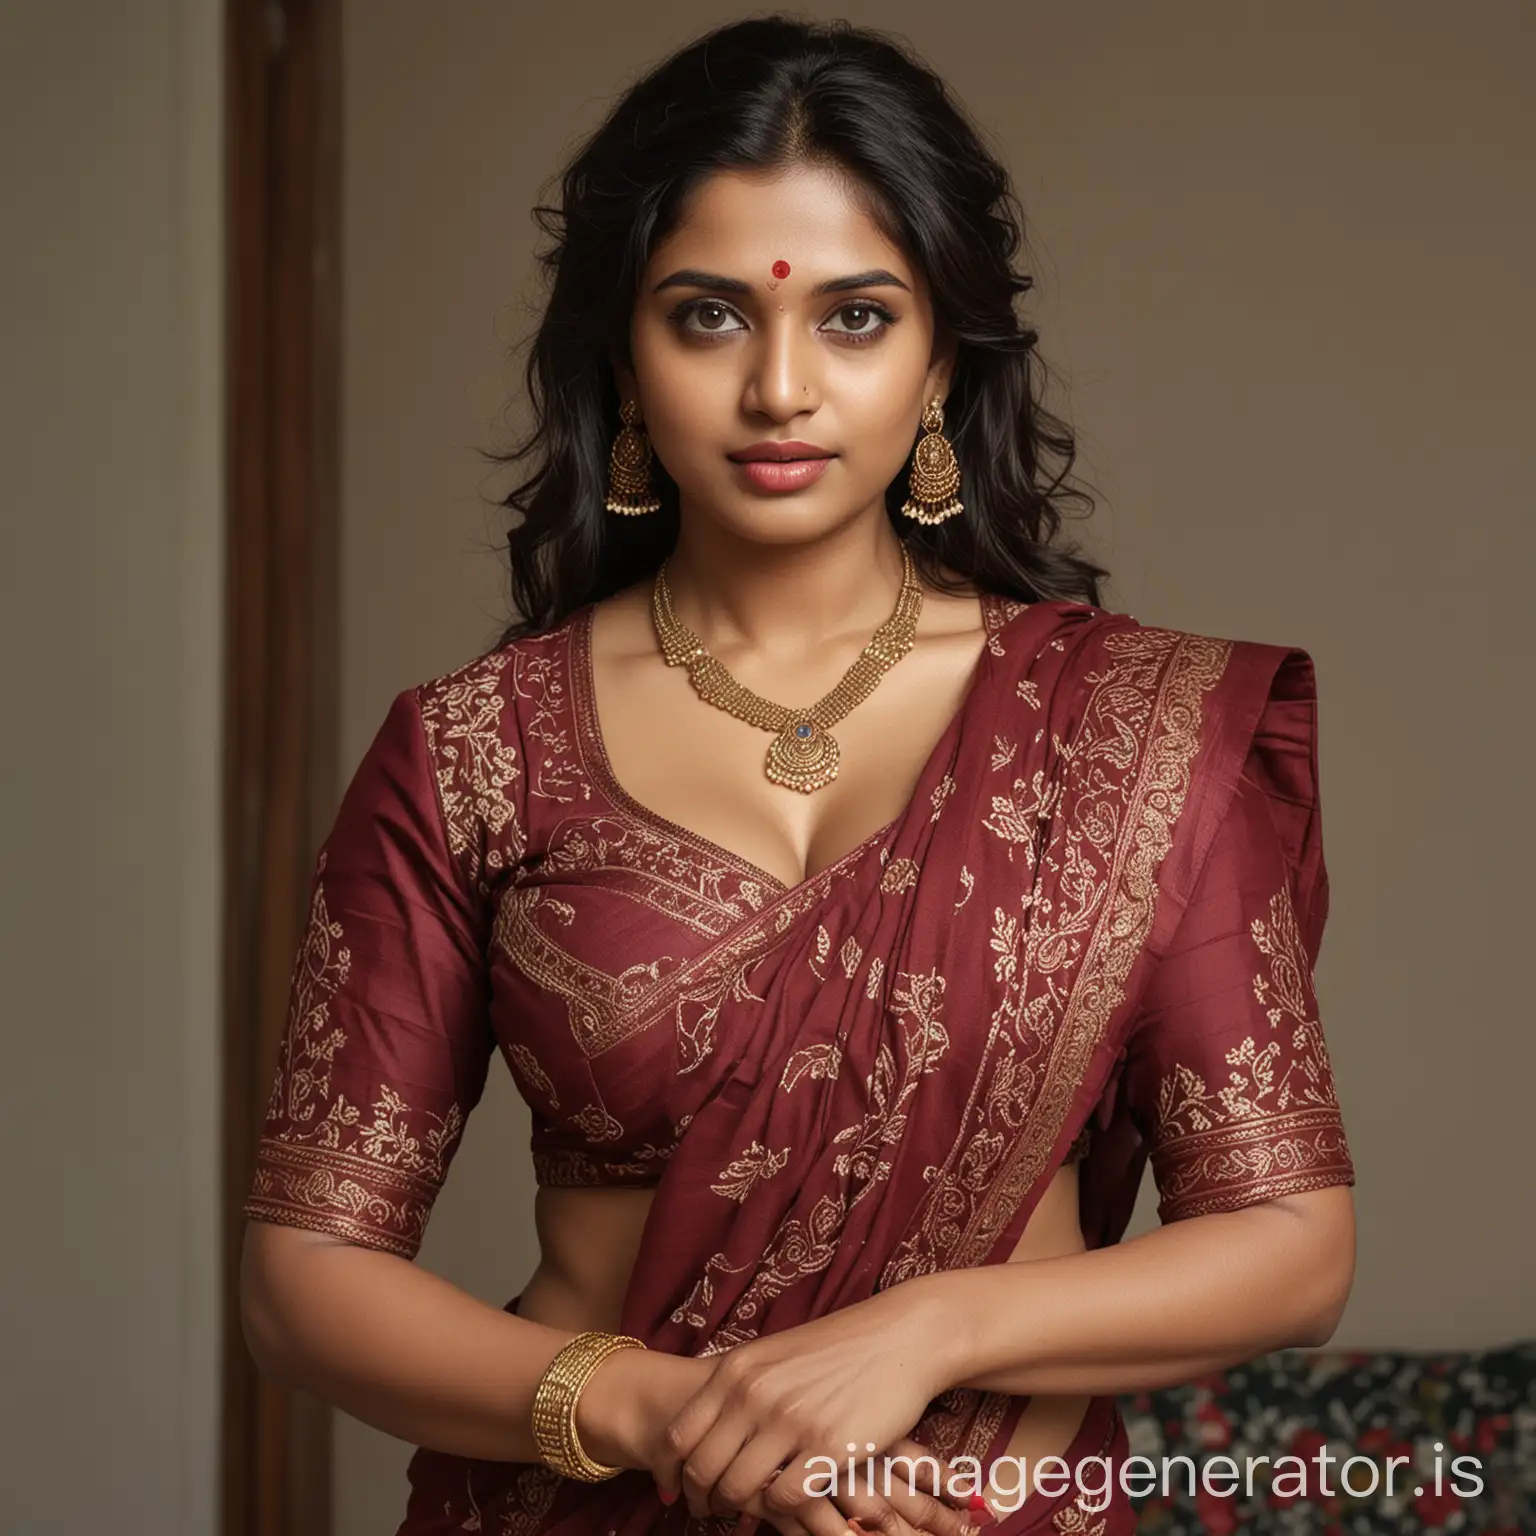 Telugu-Married-Woman-in-Maroon-Saree-Hyperrealistic-Portrait-with-Detailed-Features